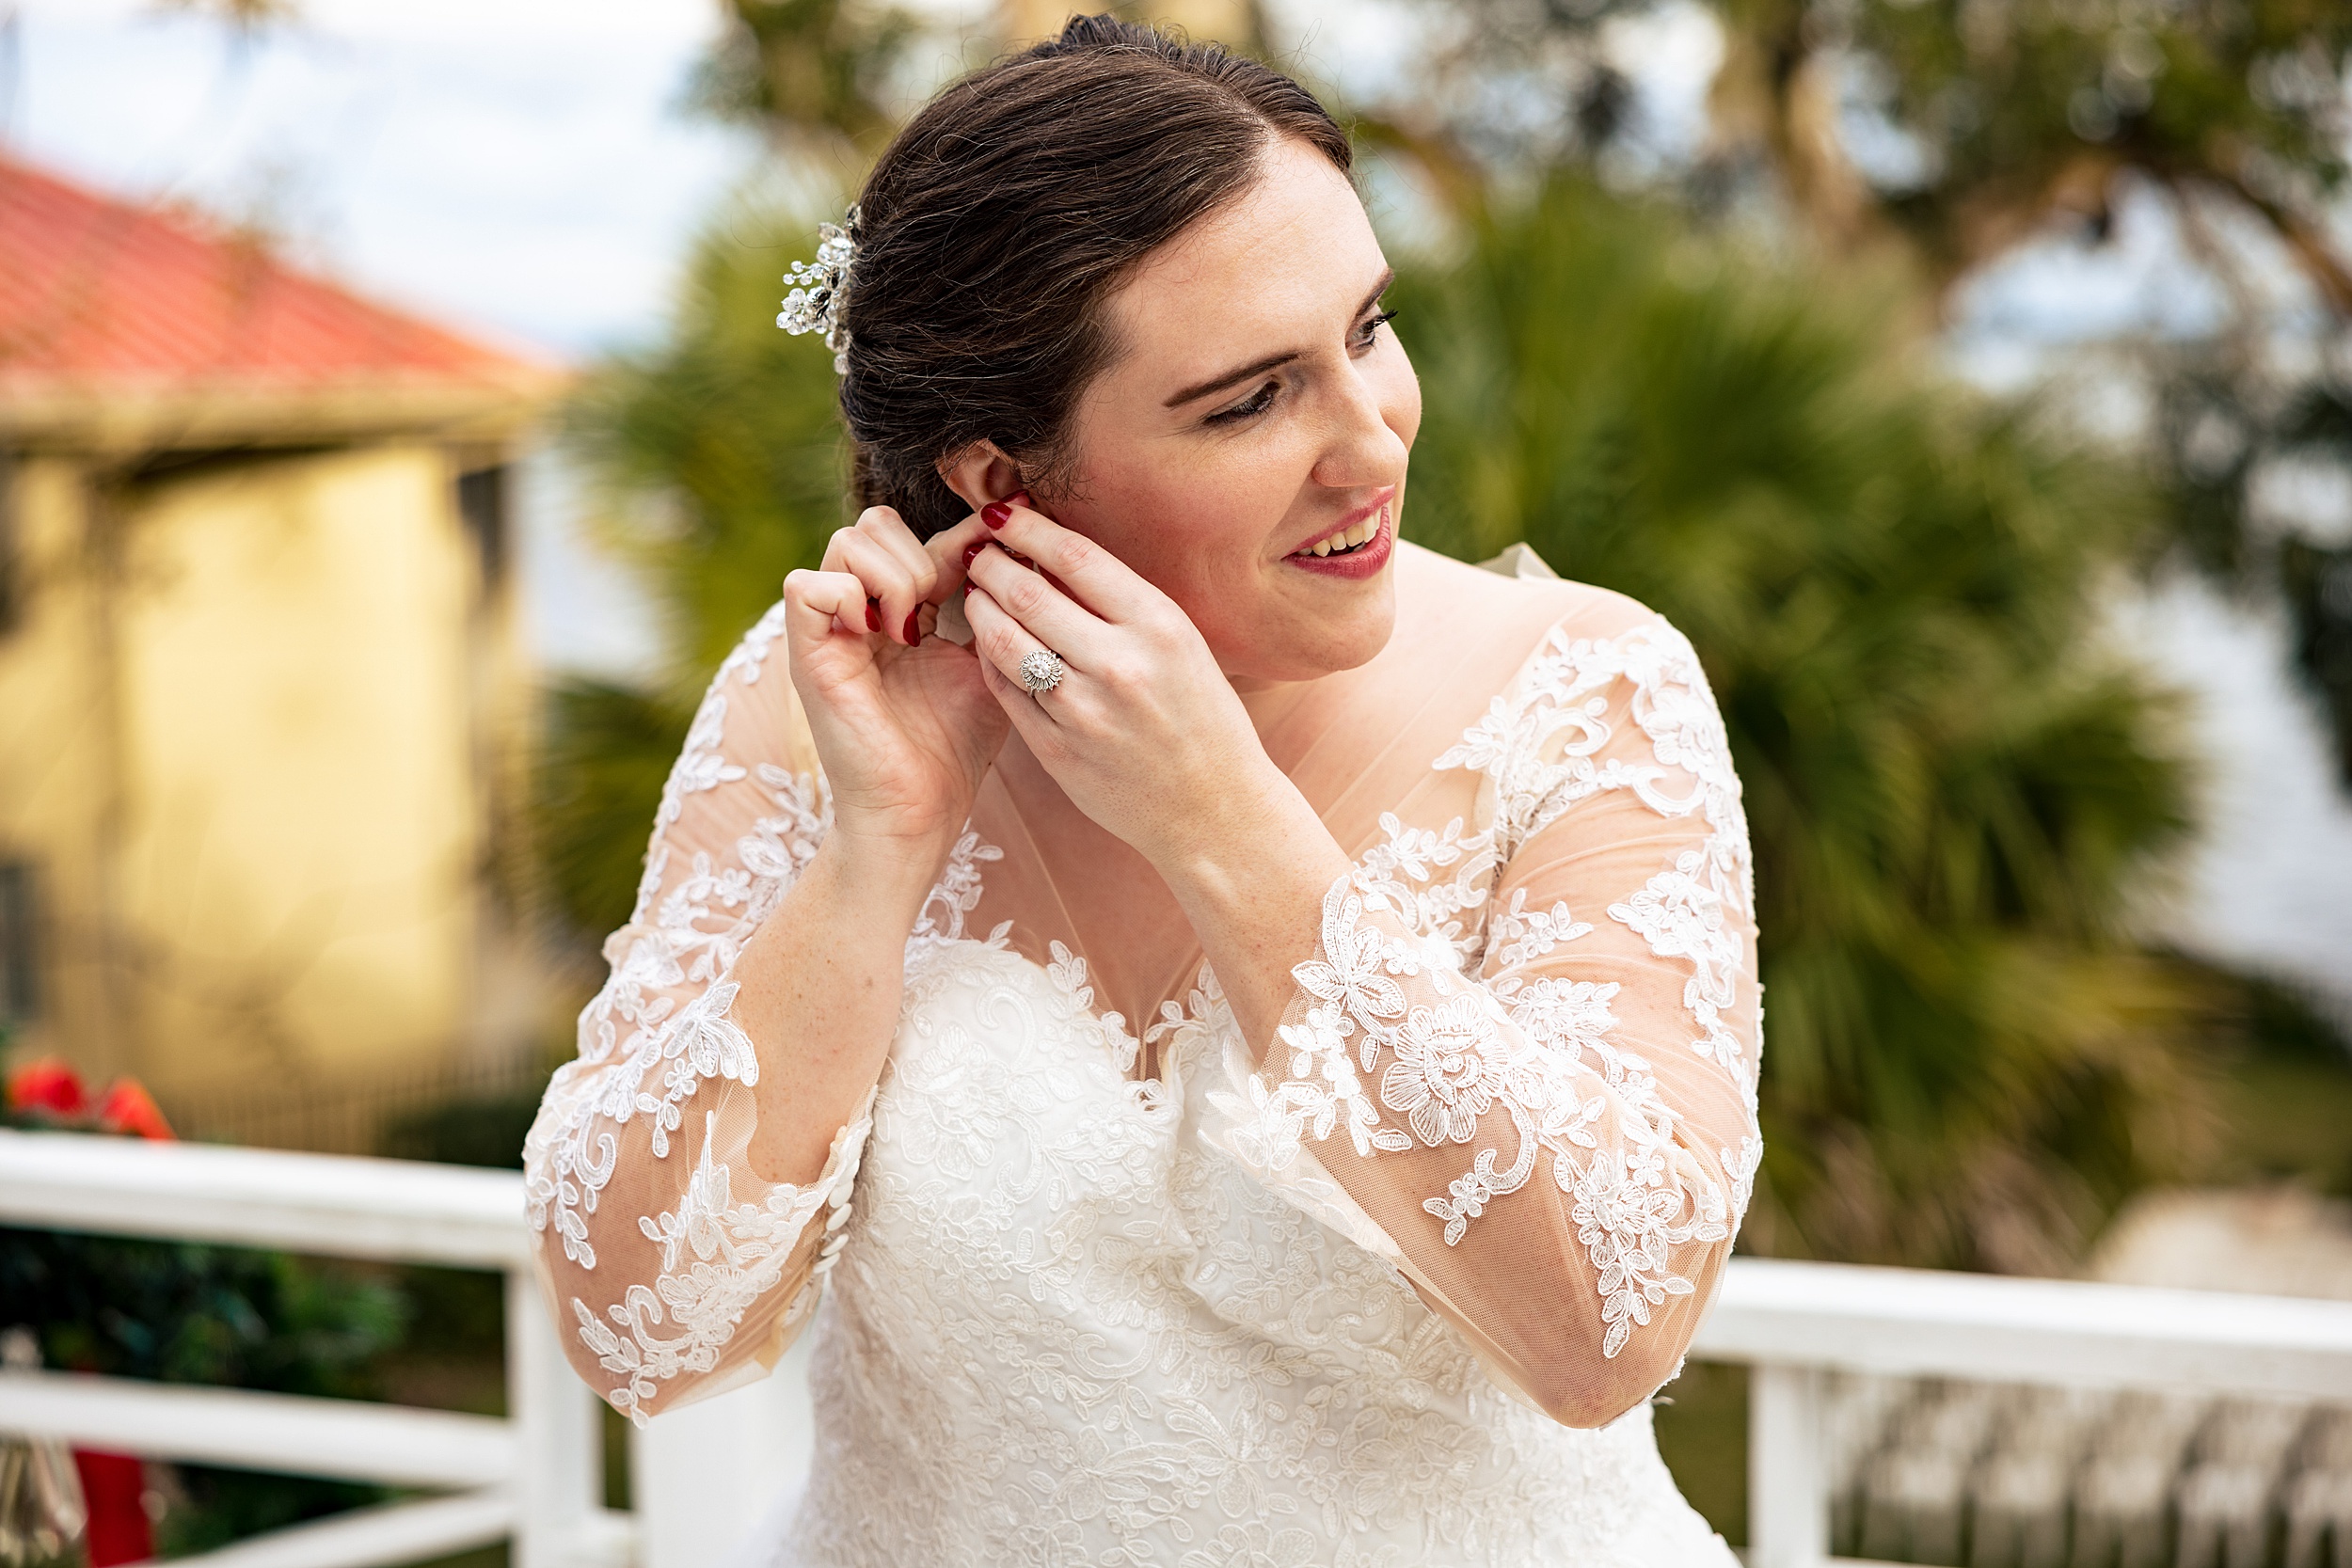 A bride in a lace embroidered dress puts on an earring